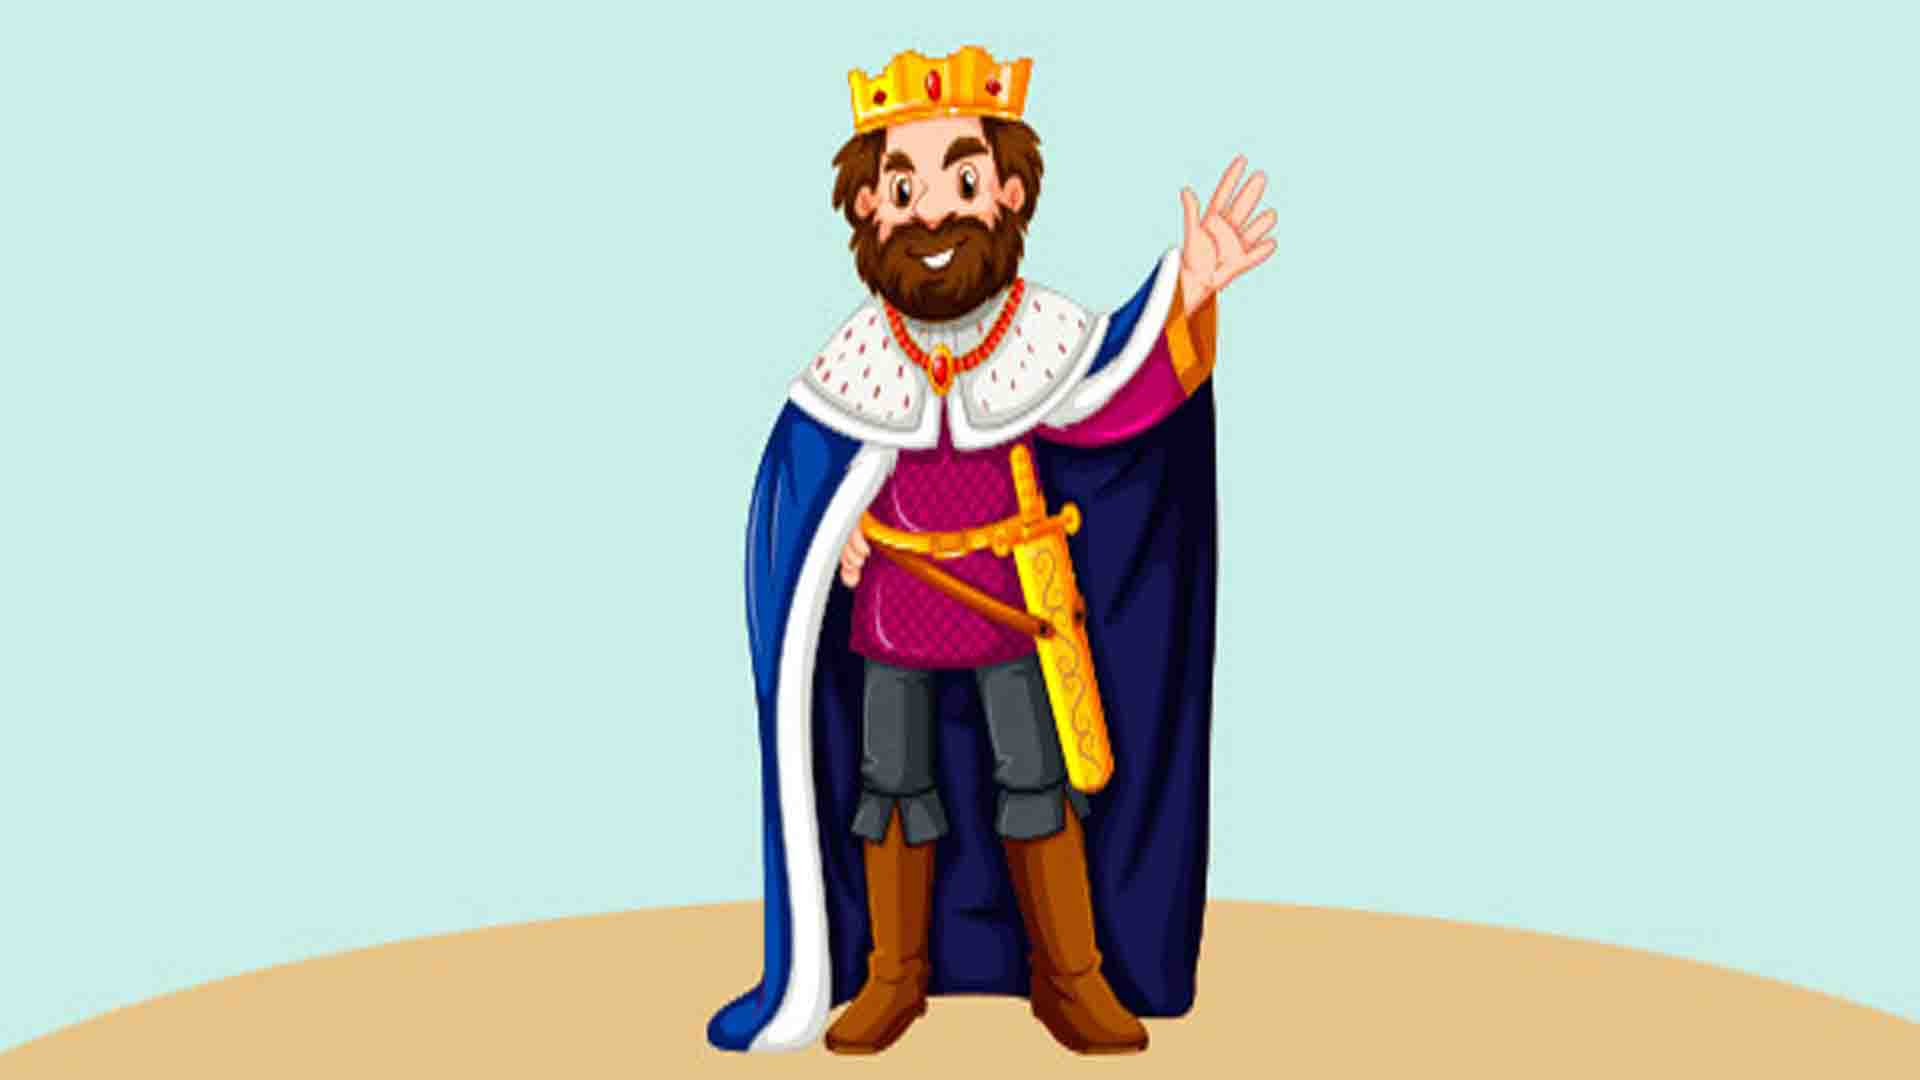 The confident king a long stories for kids | English Stories for Kids